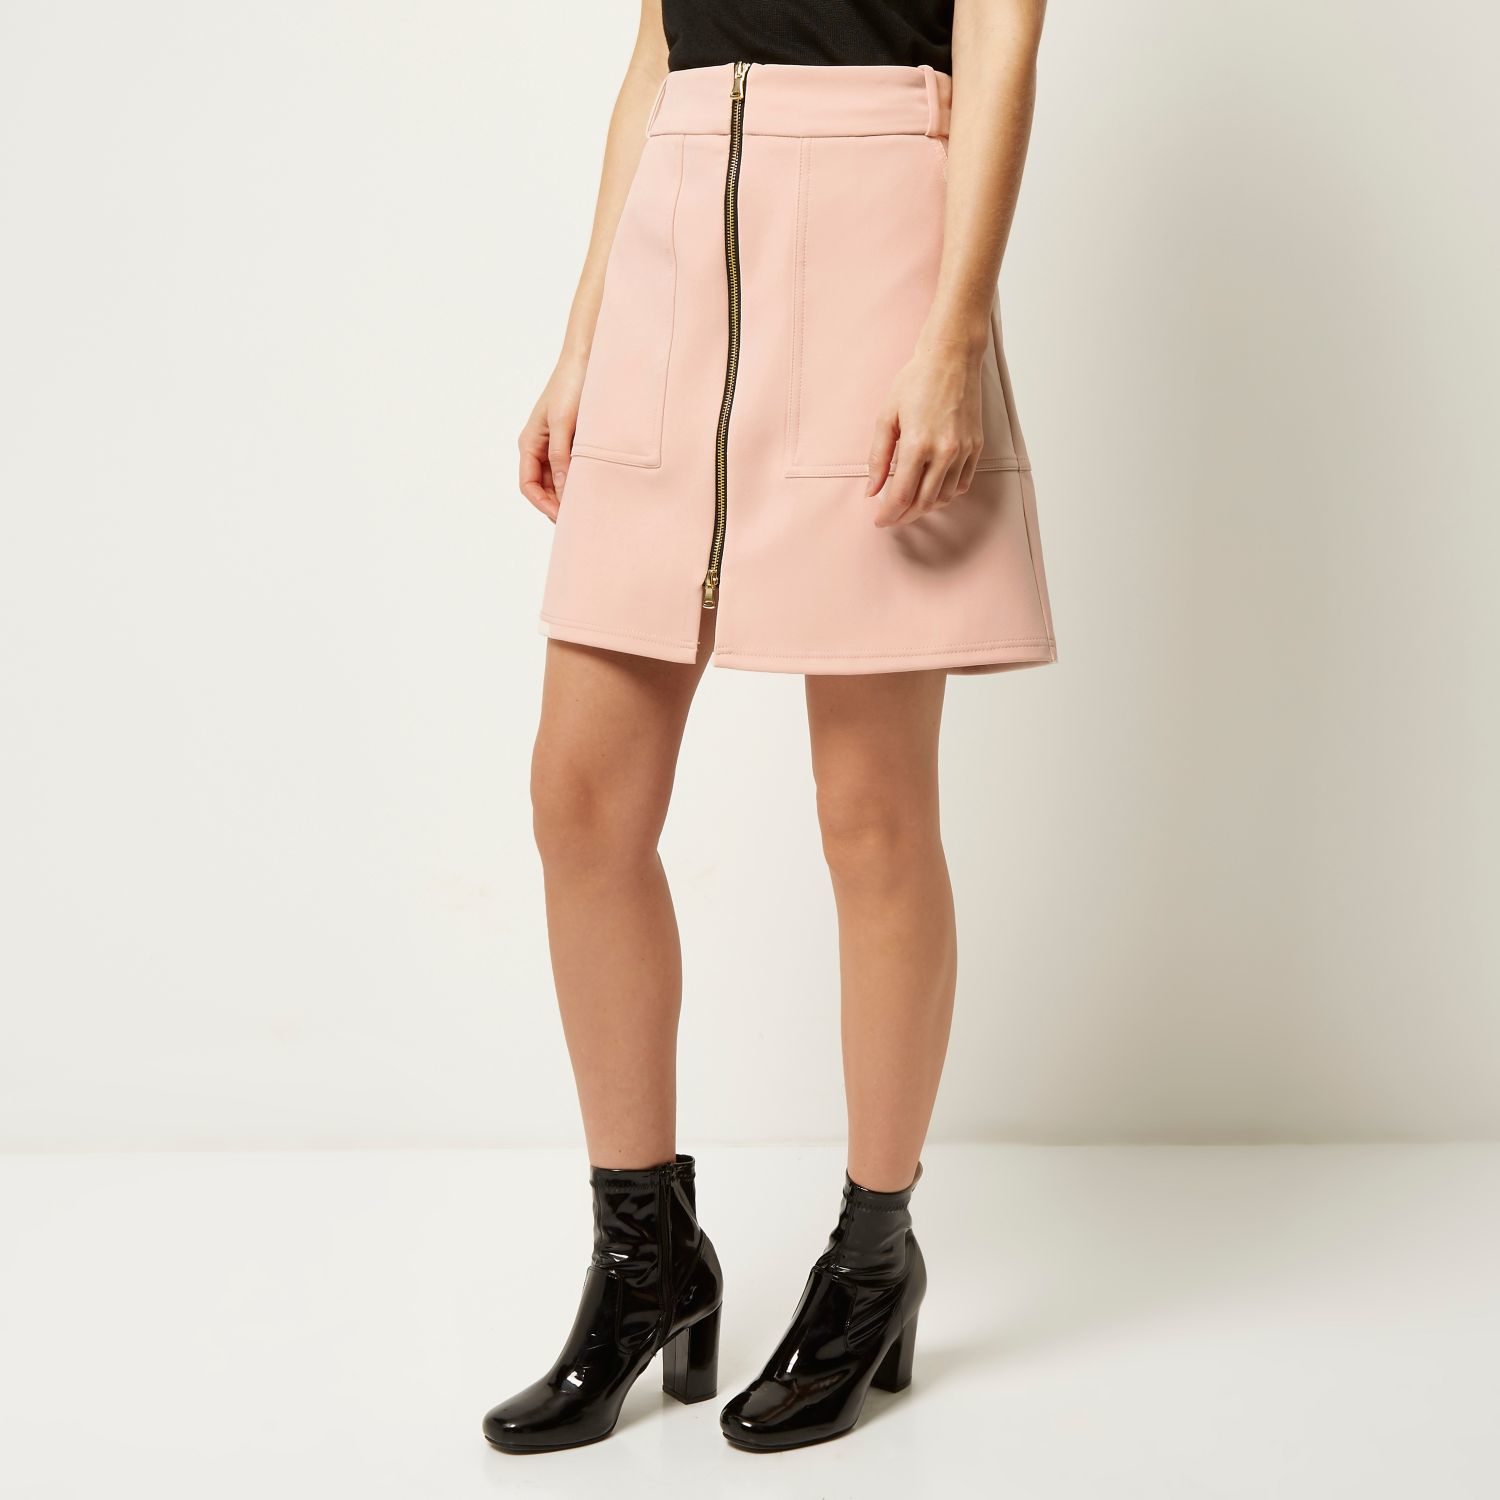 River island Light Pink Zip-up A-line Skirt in Pink | Lyst